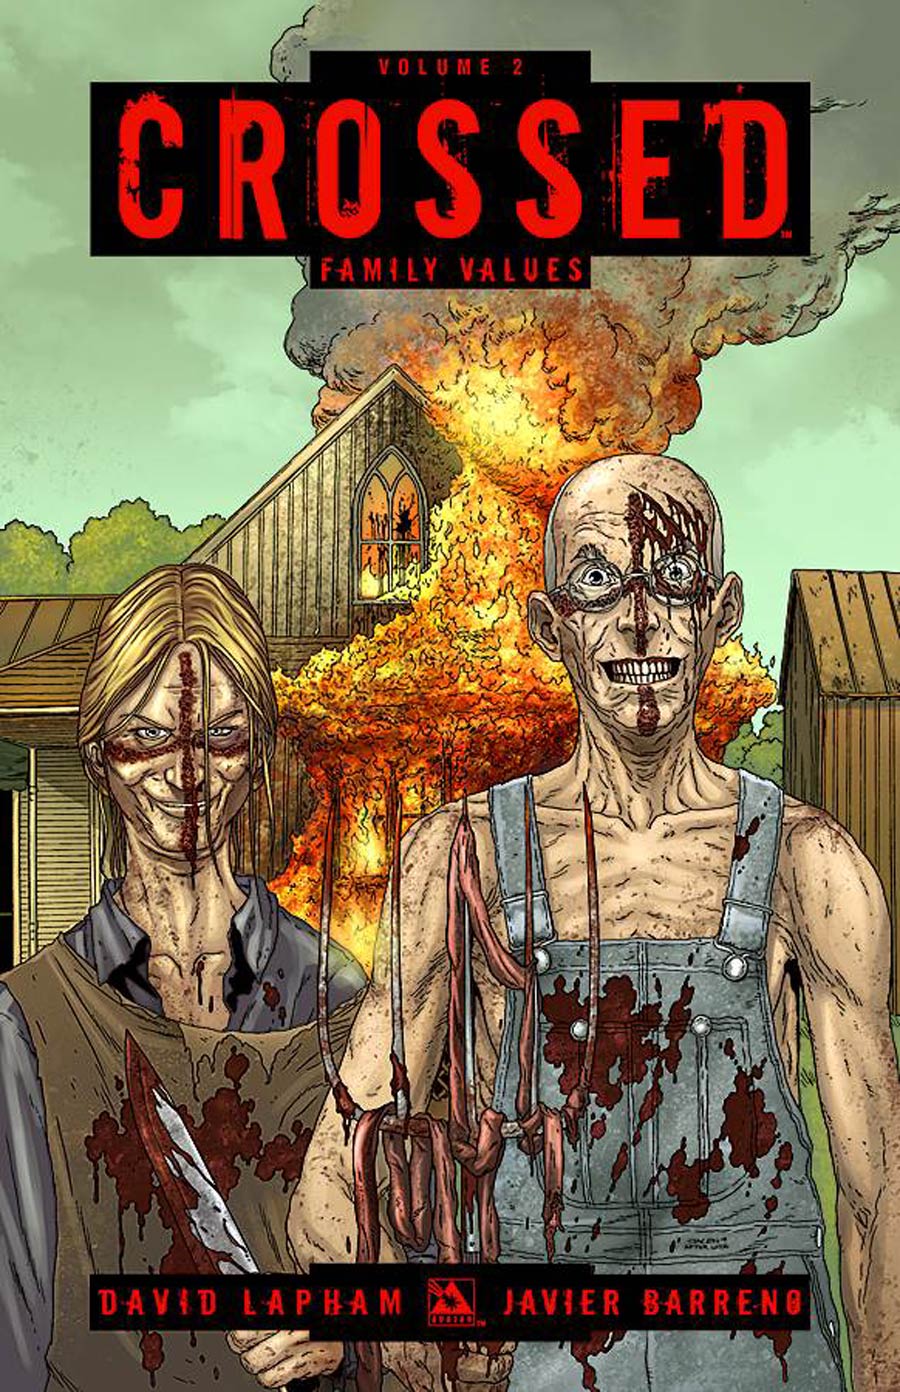 Crossed Vol 2 Family Values TP Sale Edition